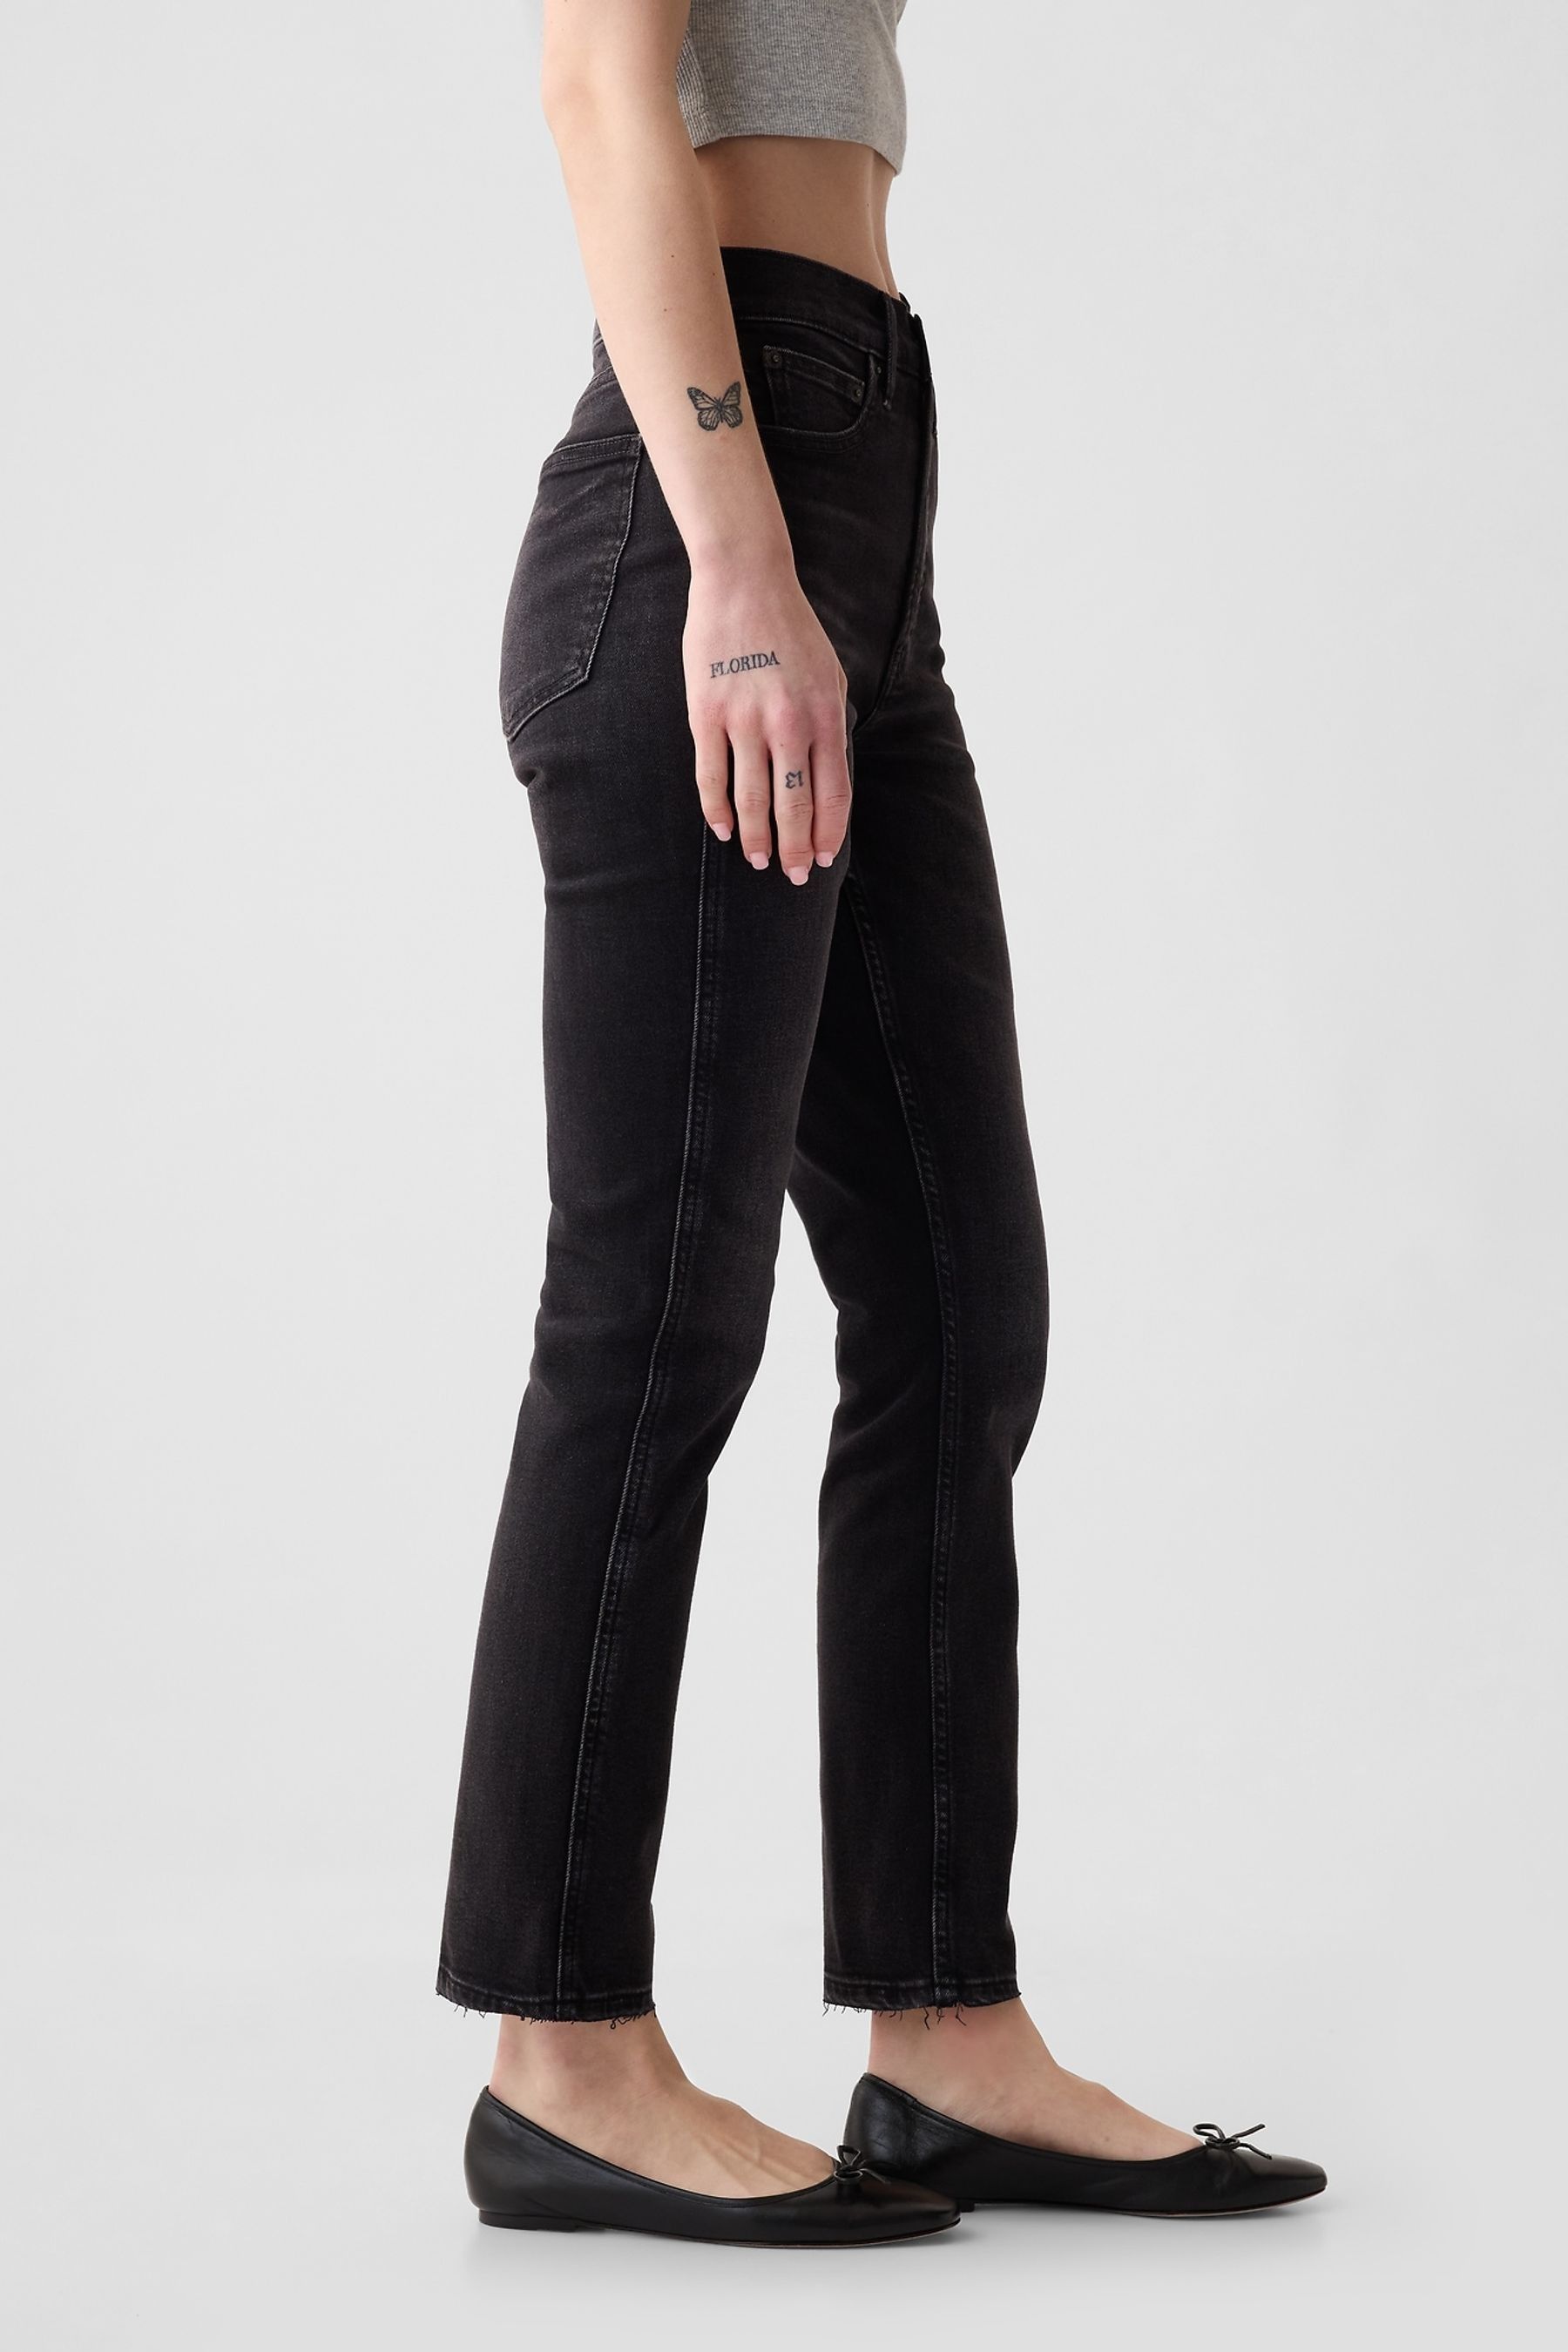 Buy Black Vintage Slim Stretch High Waisted Jeans from the Gap online shop